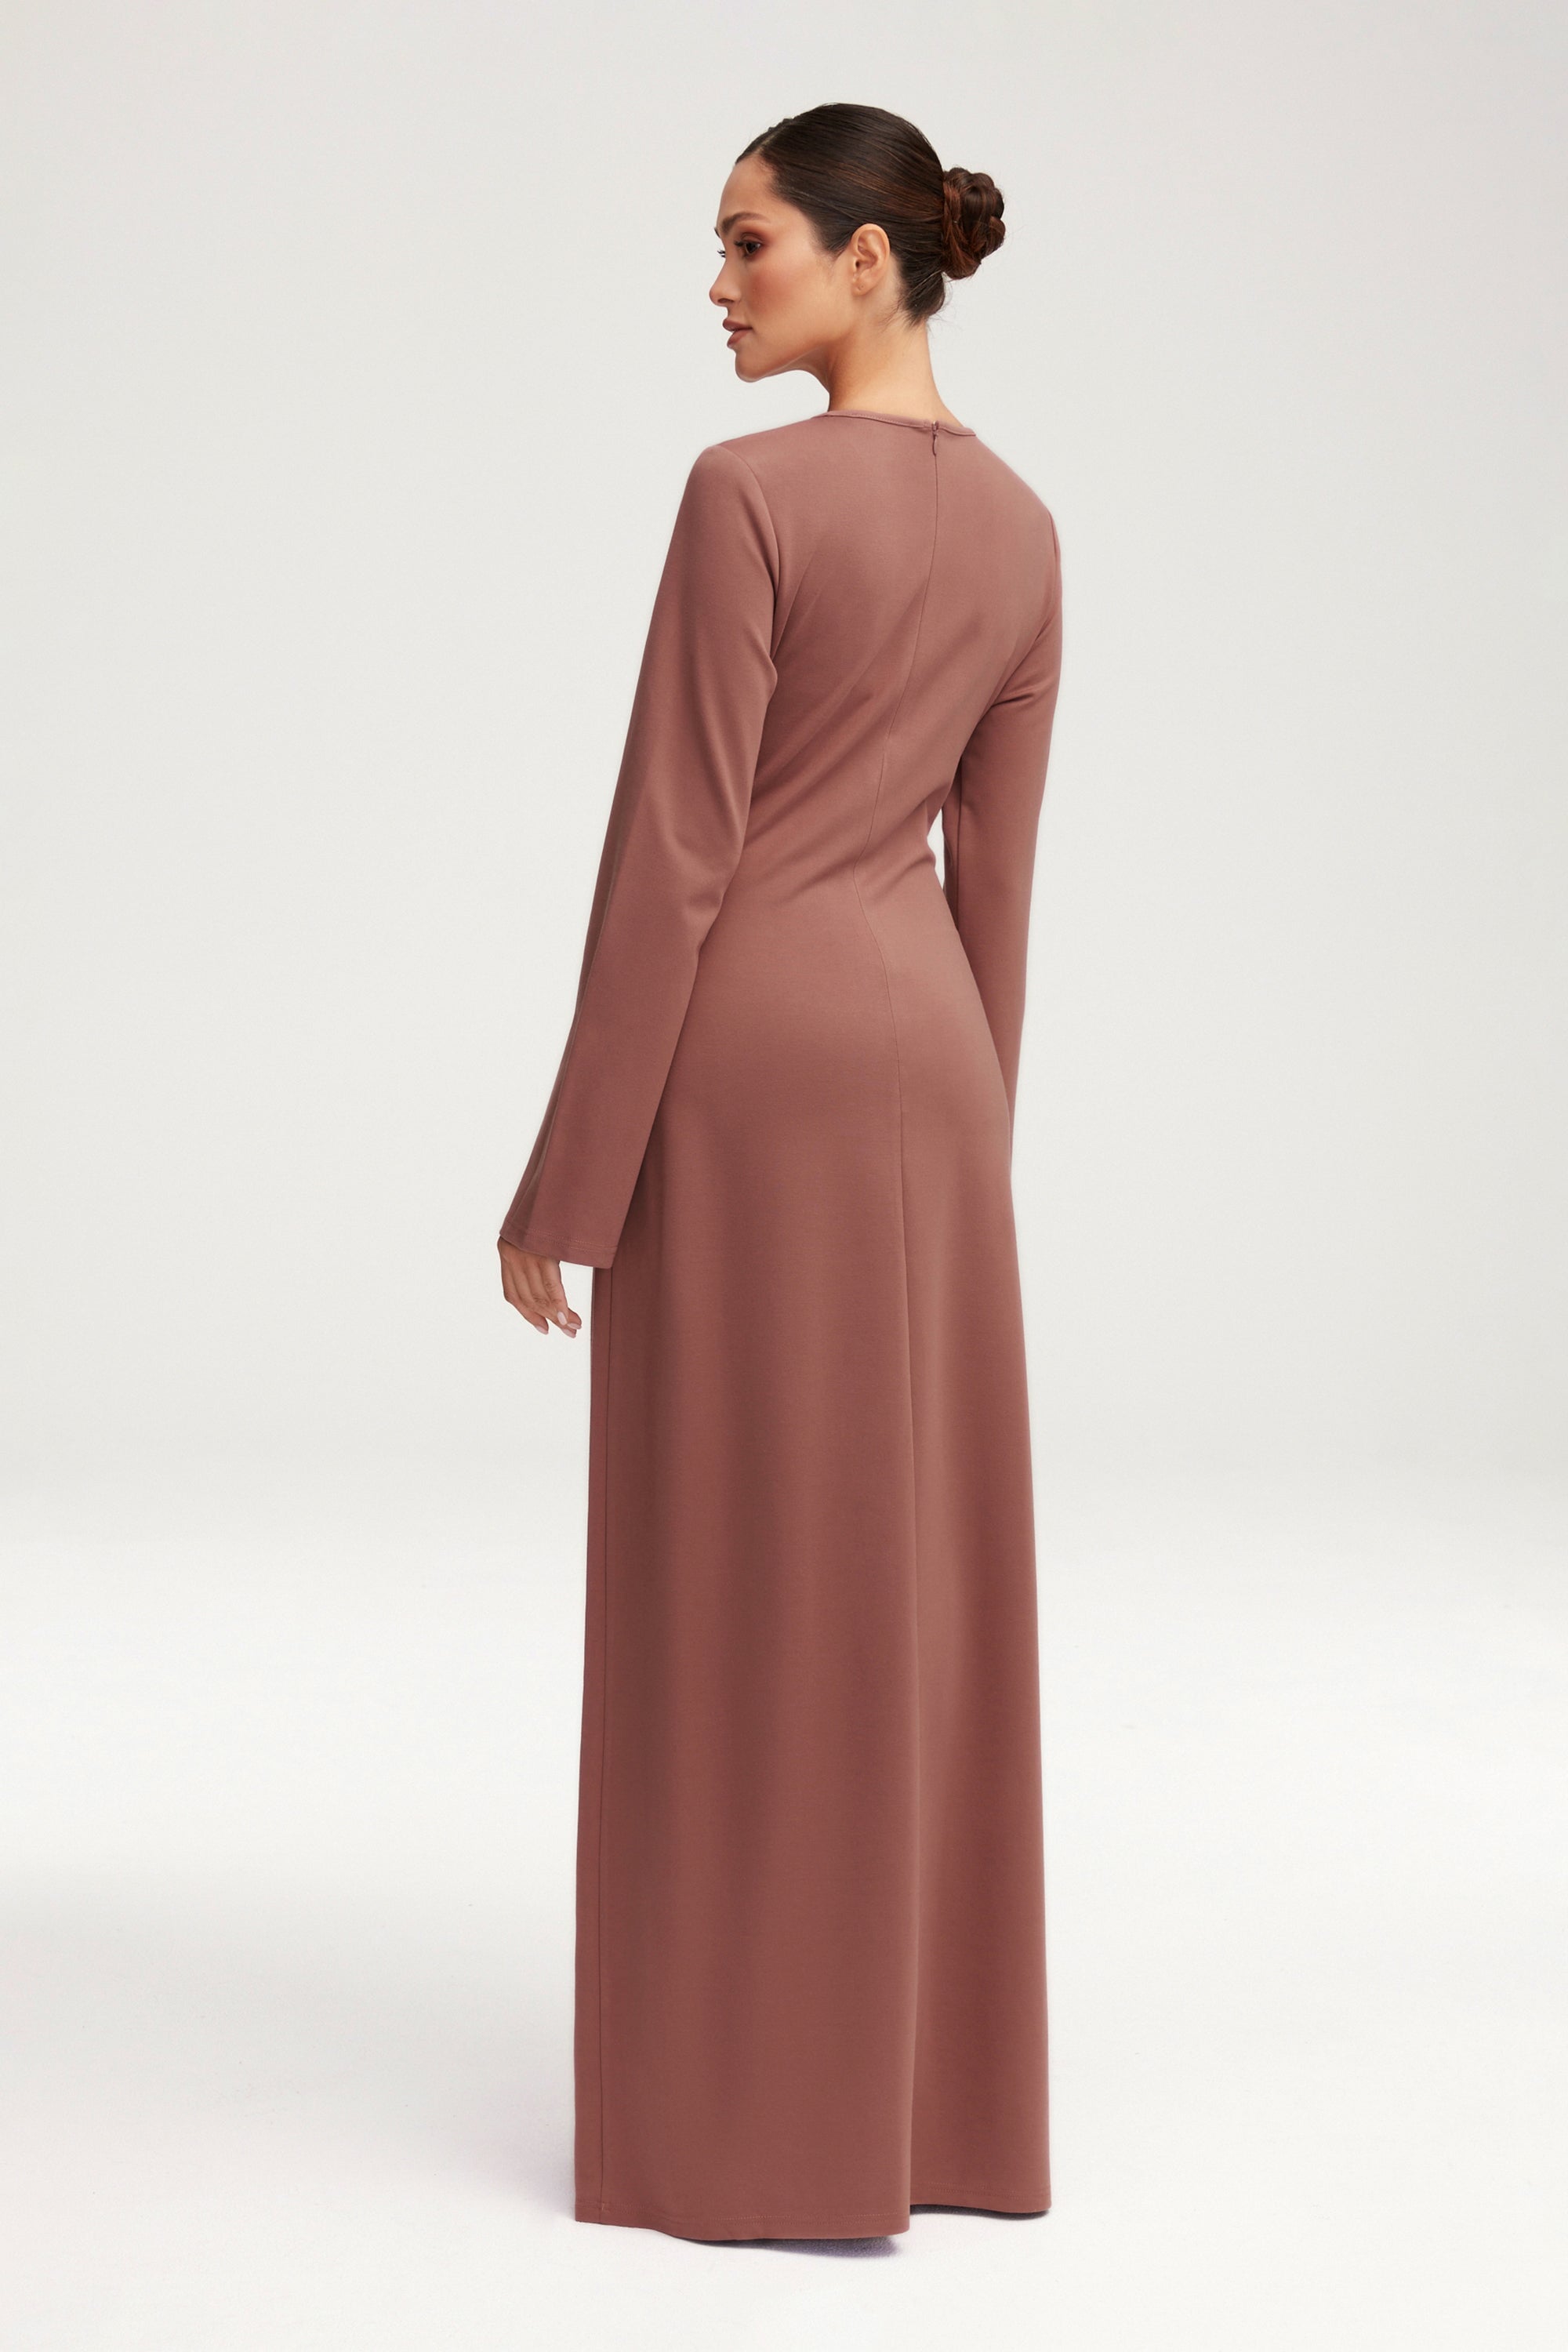 Jersey Tie Front Maxi Dress - Blush Nude Clothing Veiled 